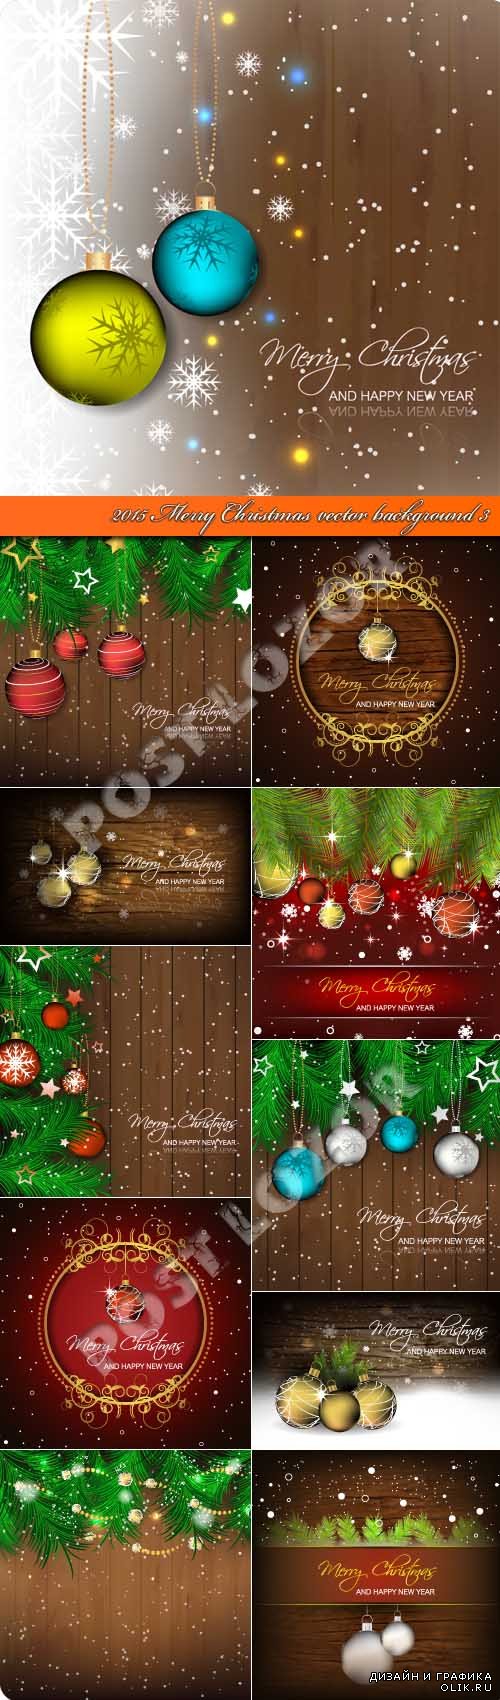 2015 Merry Christmas vector background 3